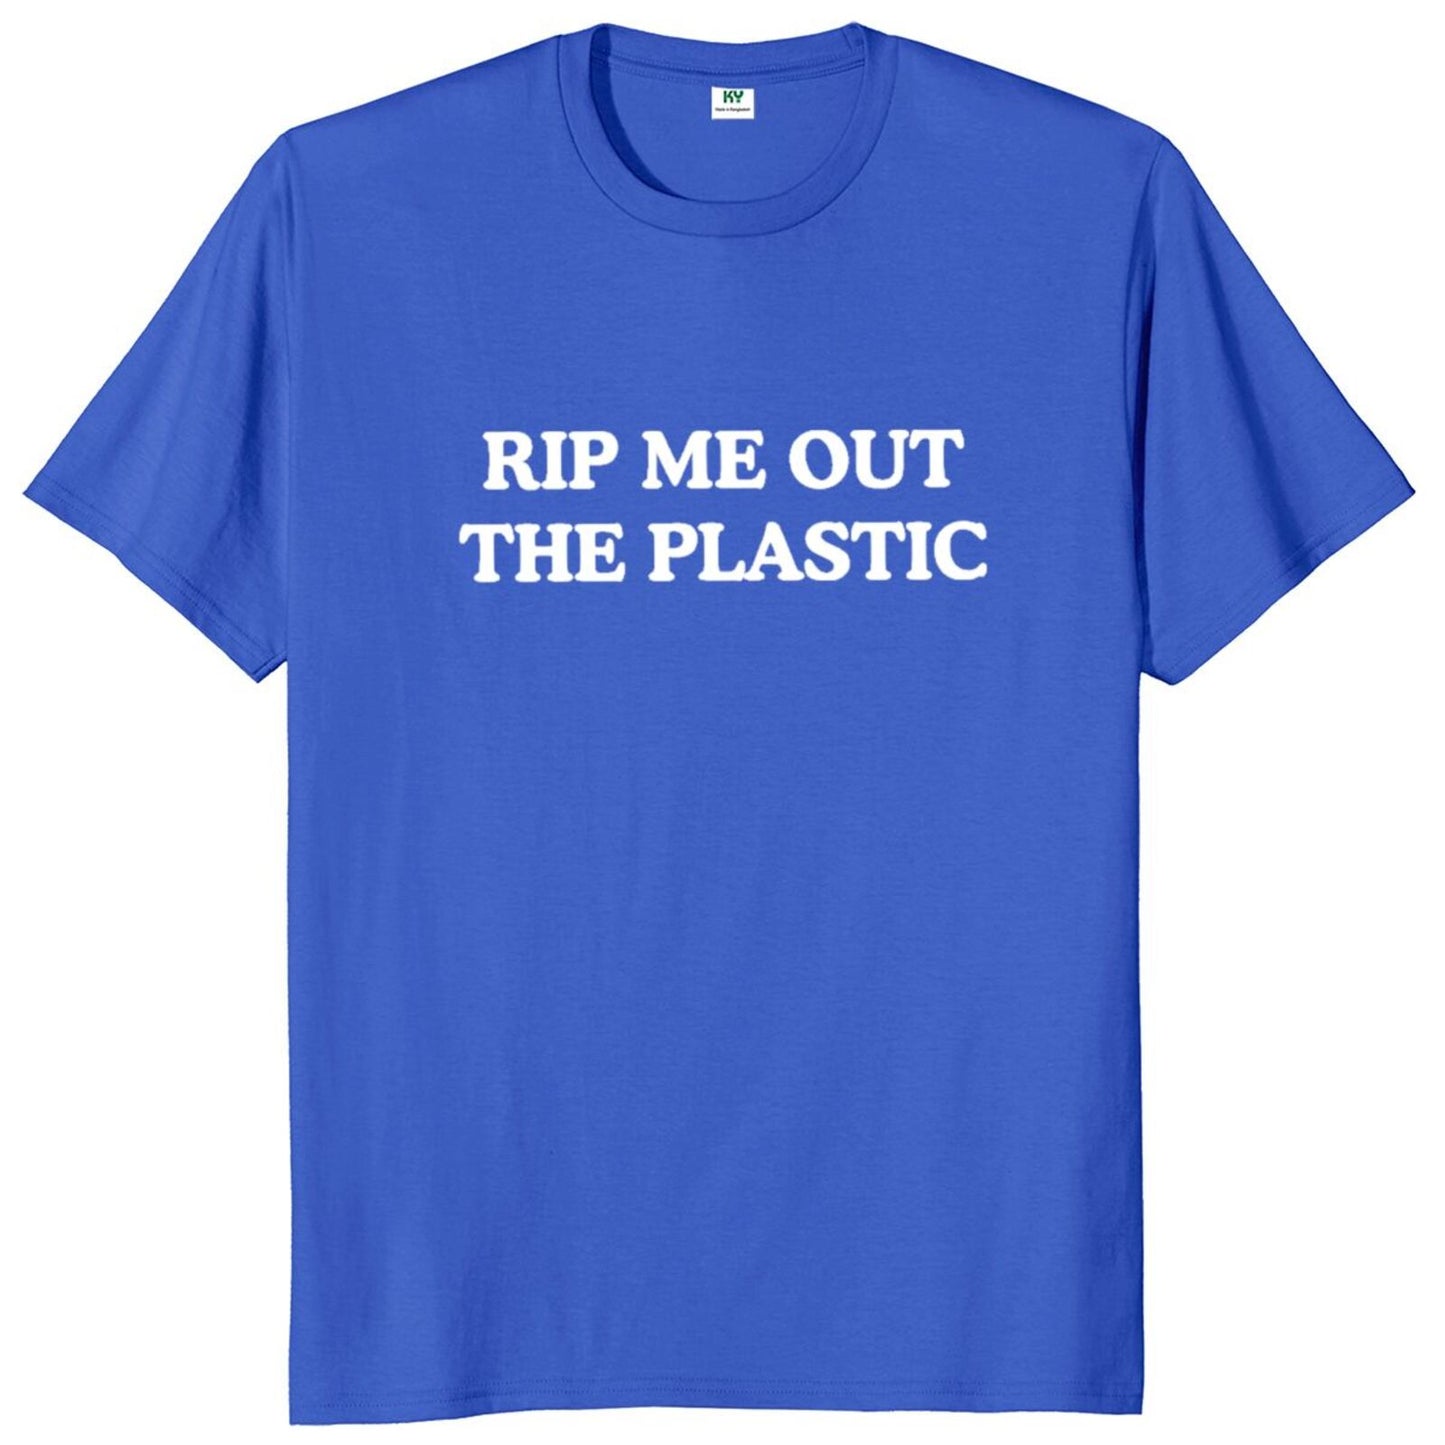 Rip Me Out The Plastic T Shirt 2023 Pop Music Lovers Tee Tops 100% Cotton Unisex O-neck Soft T-shirts For Men Women